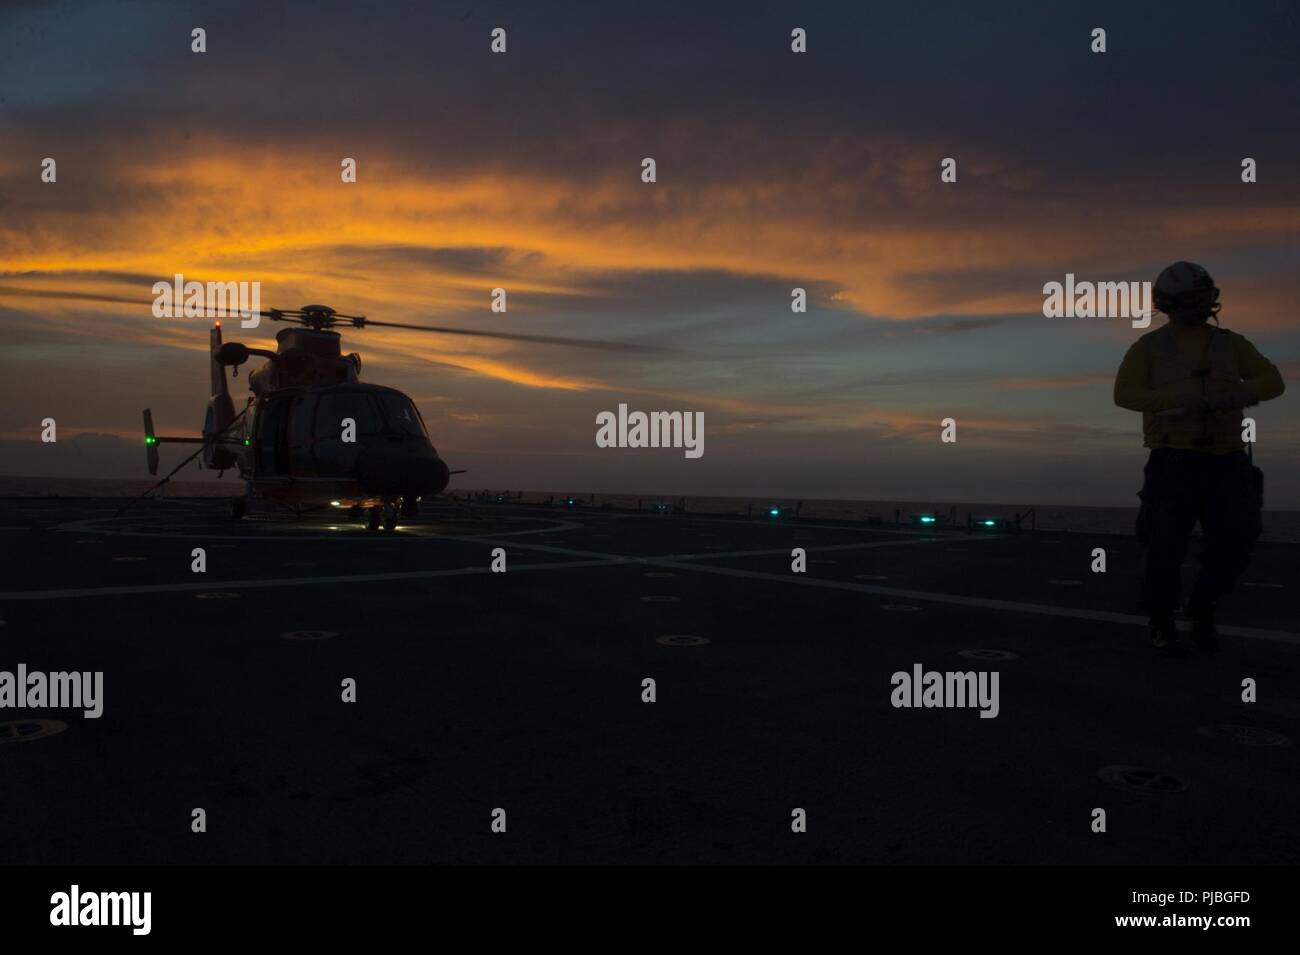 PACIFIC OCEAN (July 10, 2018)  An MH-65 Dolphin helicopter from Coast Guard Air Station Barbers Point, Hawaii, prepares for takeoff July 10, 2018, on the flight deck of the USCGC Bertholf (WMSL 750), 15 miles south of Oahu in support of RIMPAC 2018.  Twenty-five nations, more than 46 ships and 5 submarines, about 200 aircraft and 25,000 personnel are participating in RIMPAC from June 27 to Aug. 2 in and around the Hawaiian Island and Southern California.  The world’s largest international maritime exercise, RIMPAC provides a unique training opportunity while fostering and sustaining cooperativ Stock Photo